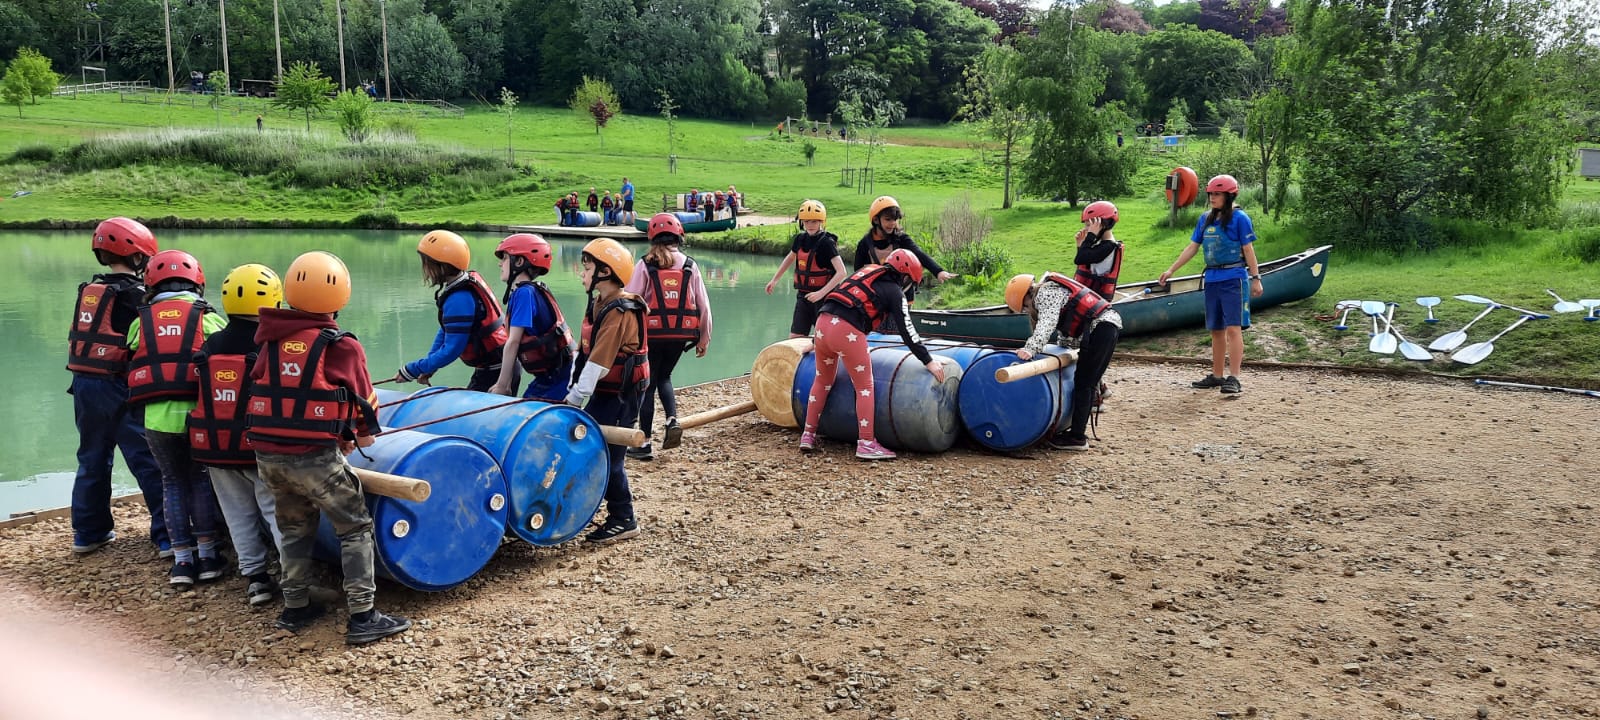 Children grouped next to a lake, preparing to launch rafts they have build using rope, wood and blue plastic bung drums